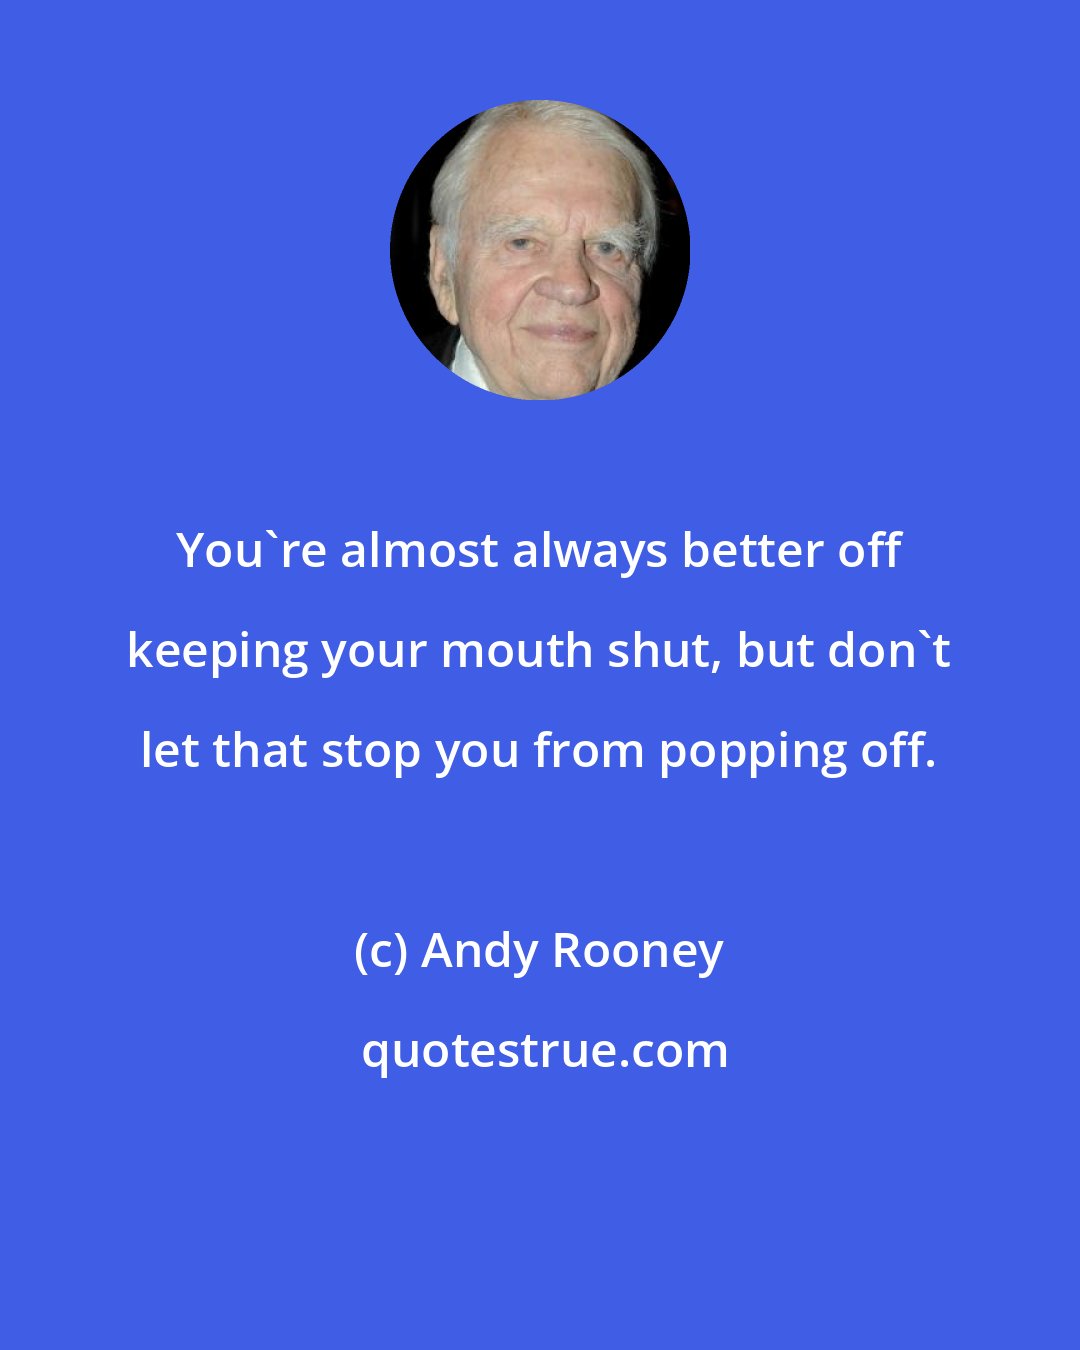 Andy Rooney: You're almost always better off keeping your mouth shut, but don't let that stop you from popping off.